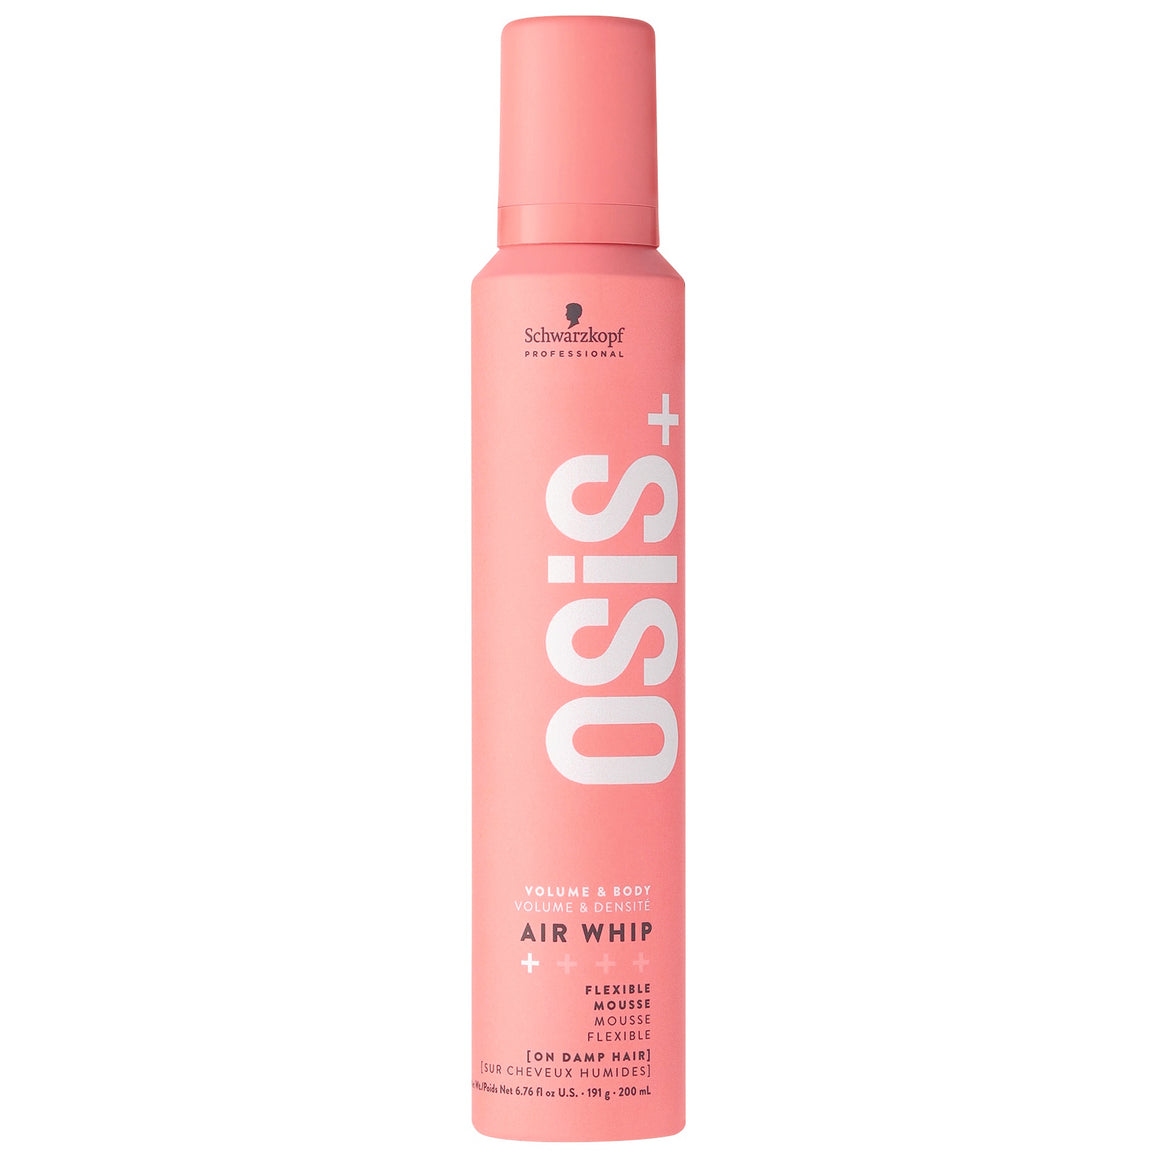 Schwarzkopf Professional OSiS Air Whip Flexible Mousse 200ml at Eds Hair Bramhall